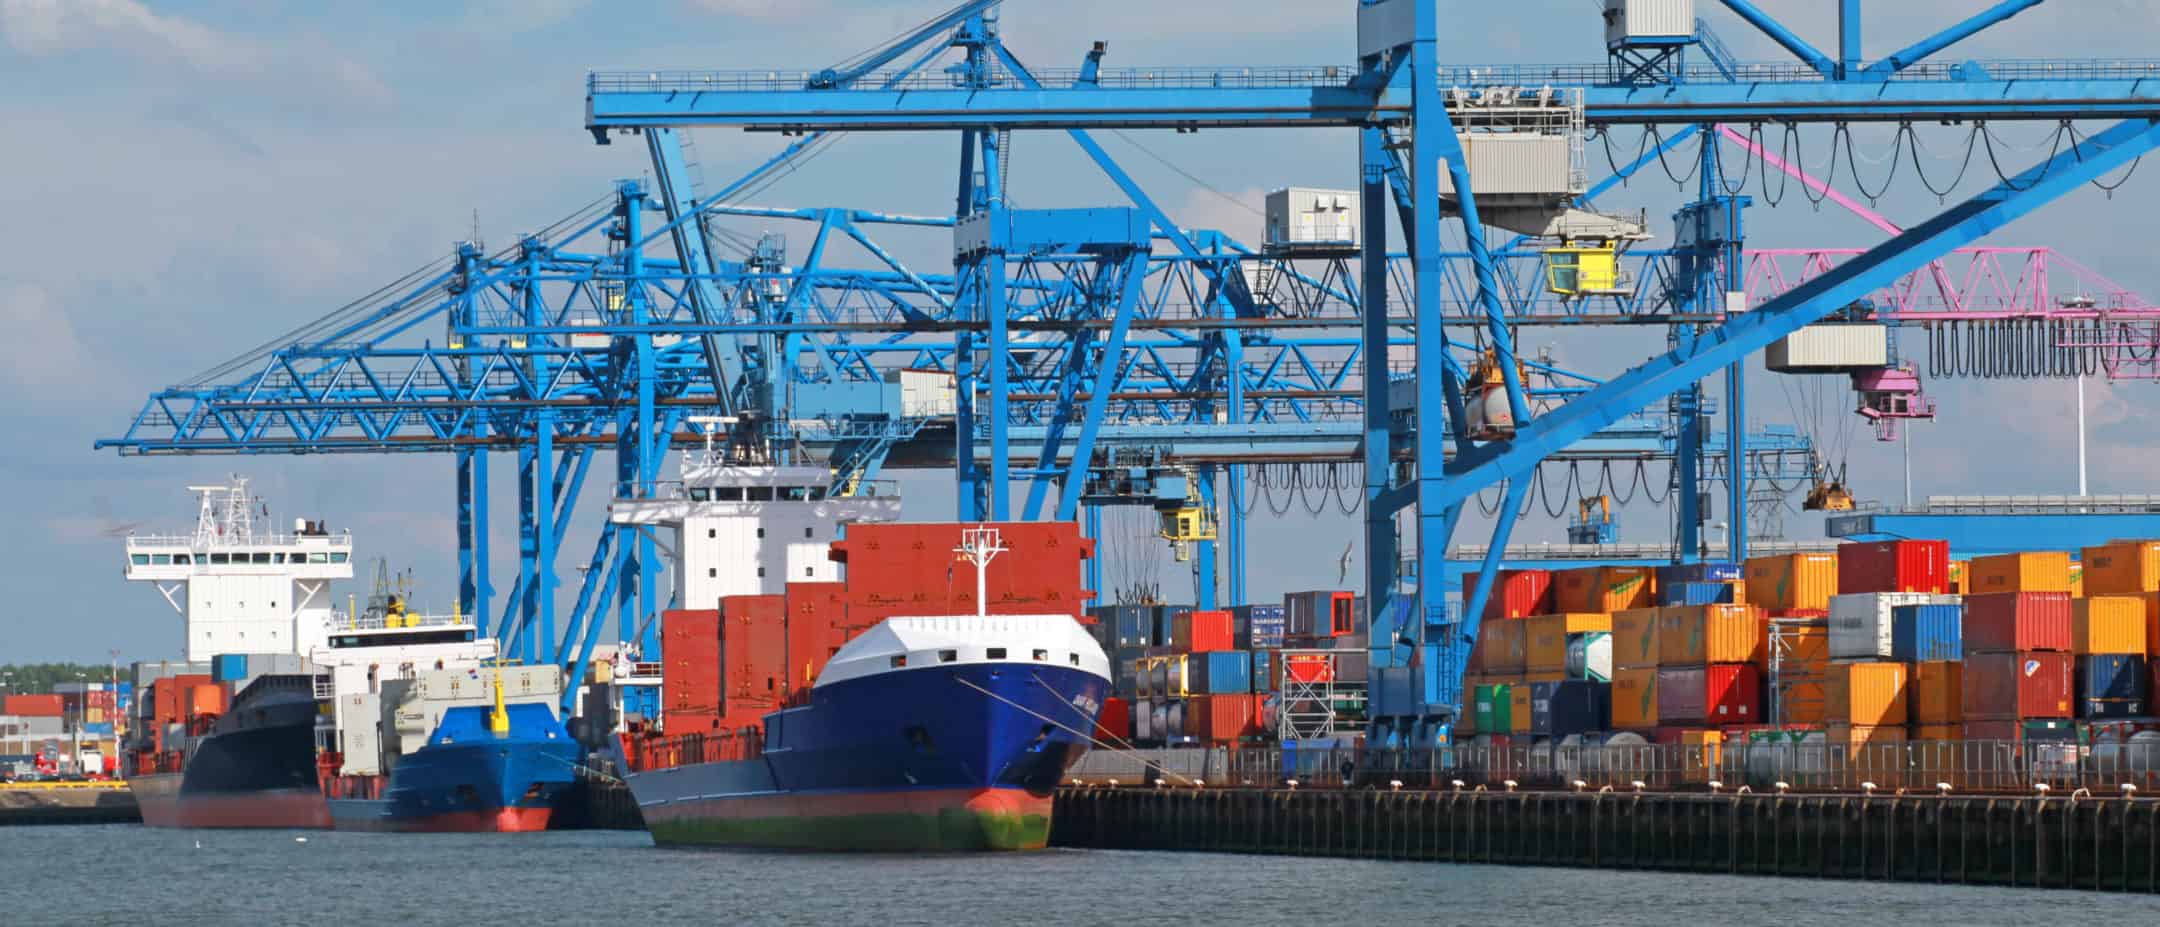 AECOM performed an environmental safety and due diligence assessment for a container terminal at the Port of Rotterdam